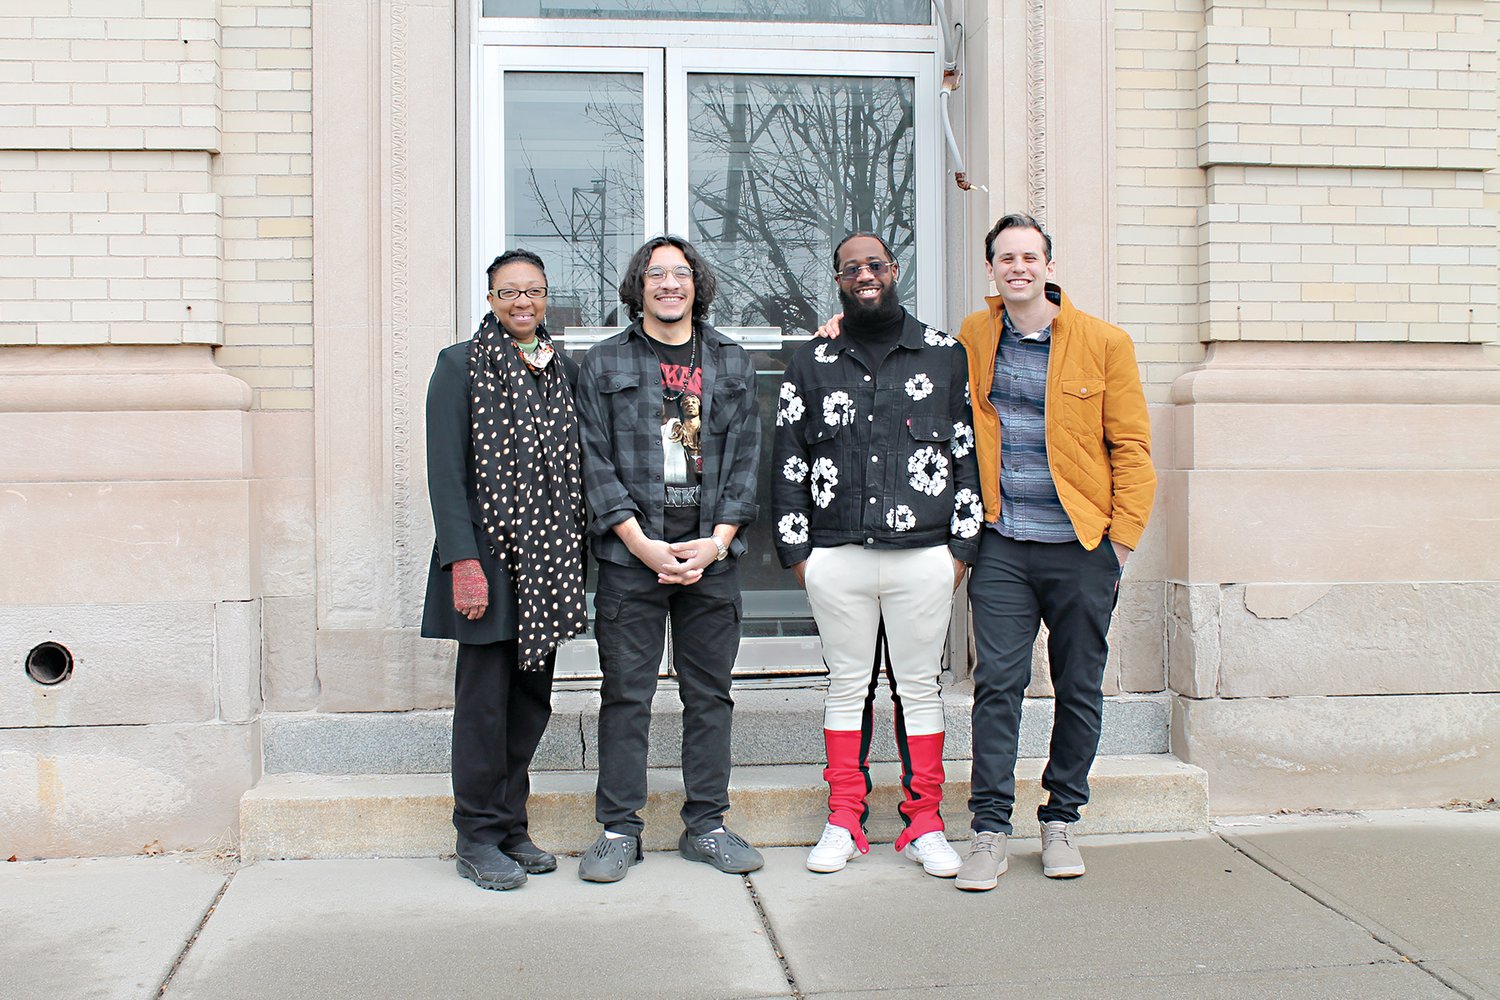 From left, Ellyane Hutchinson, Douglas Shindler, Michael Davis, and Tal Beery pose in front of the Historic Key Bank Building new home to the Black Library.